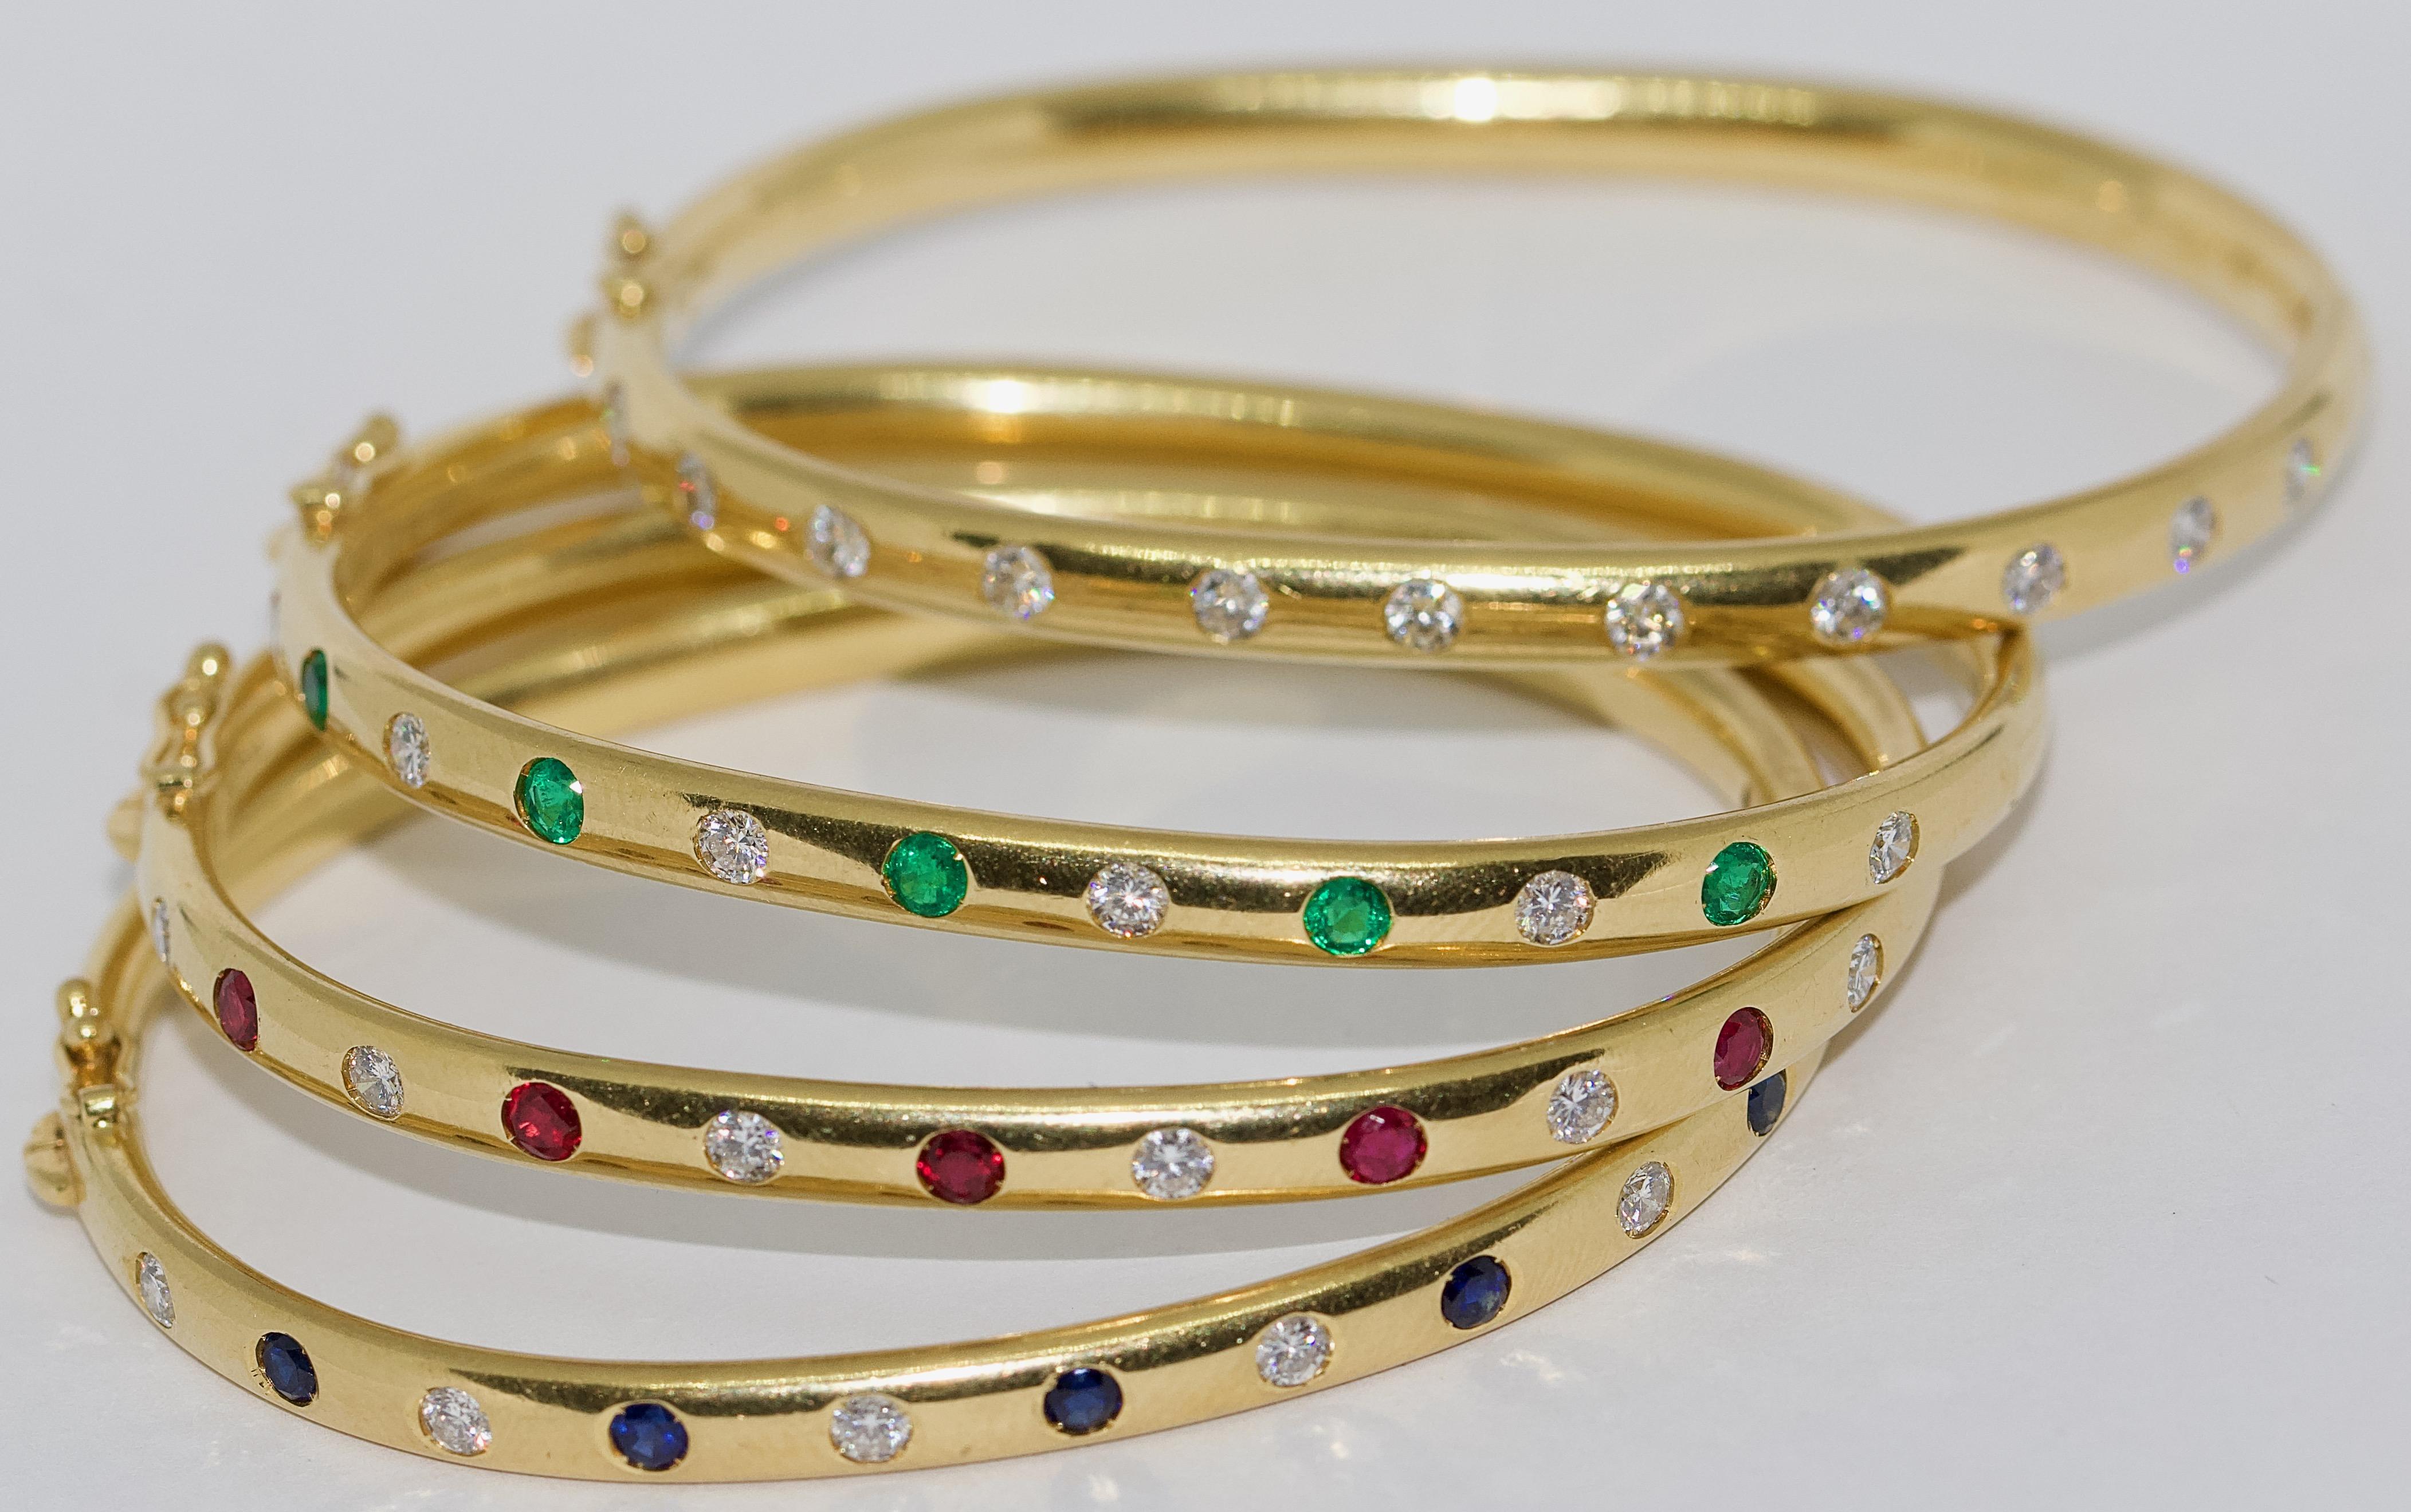 Set of four modern, charming bangles in 18 Karat gold set with diamonds, sapphires and emeralds.

Finest goldsmith work. Each bracelet is hallmarked.
All 44 stones are of very good quality.
Each gemstone weighs about 0.1 carat.

Excellent condition.